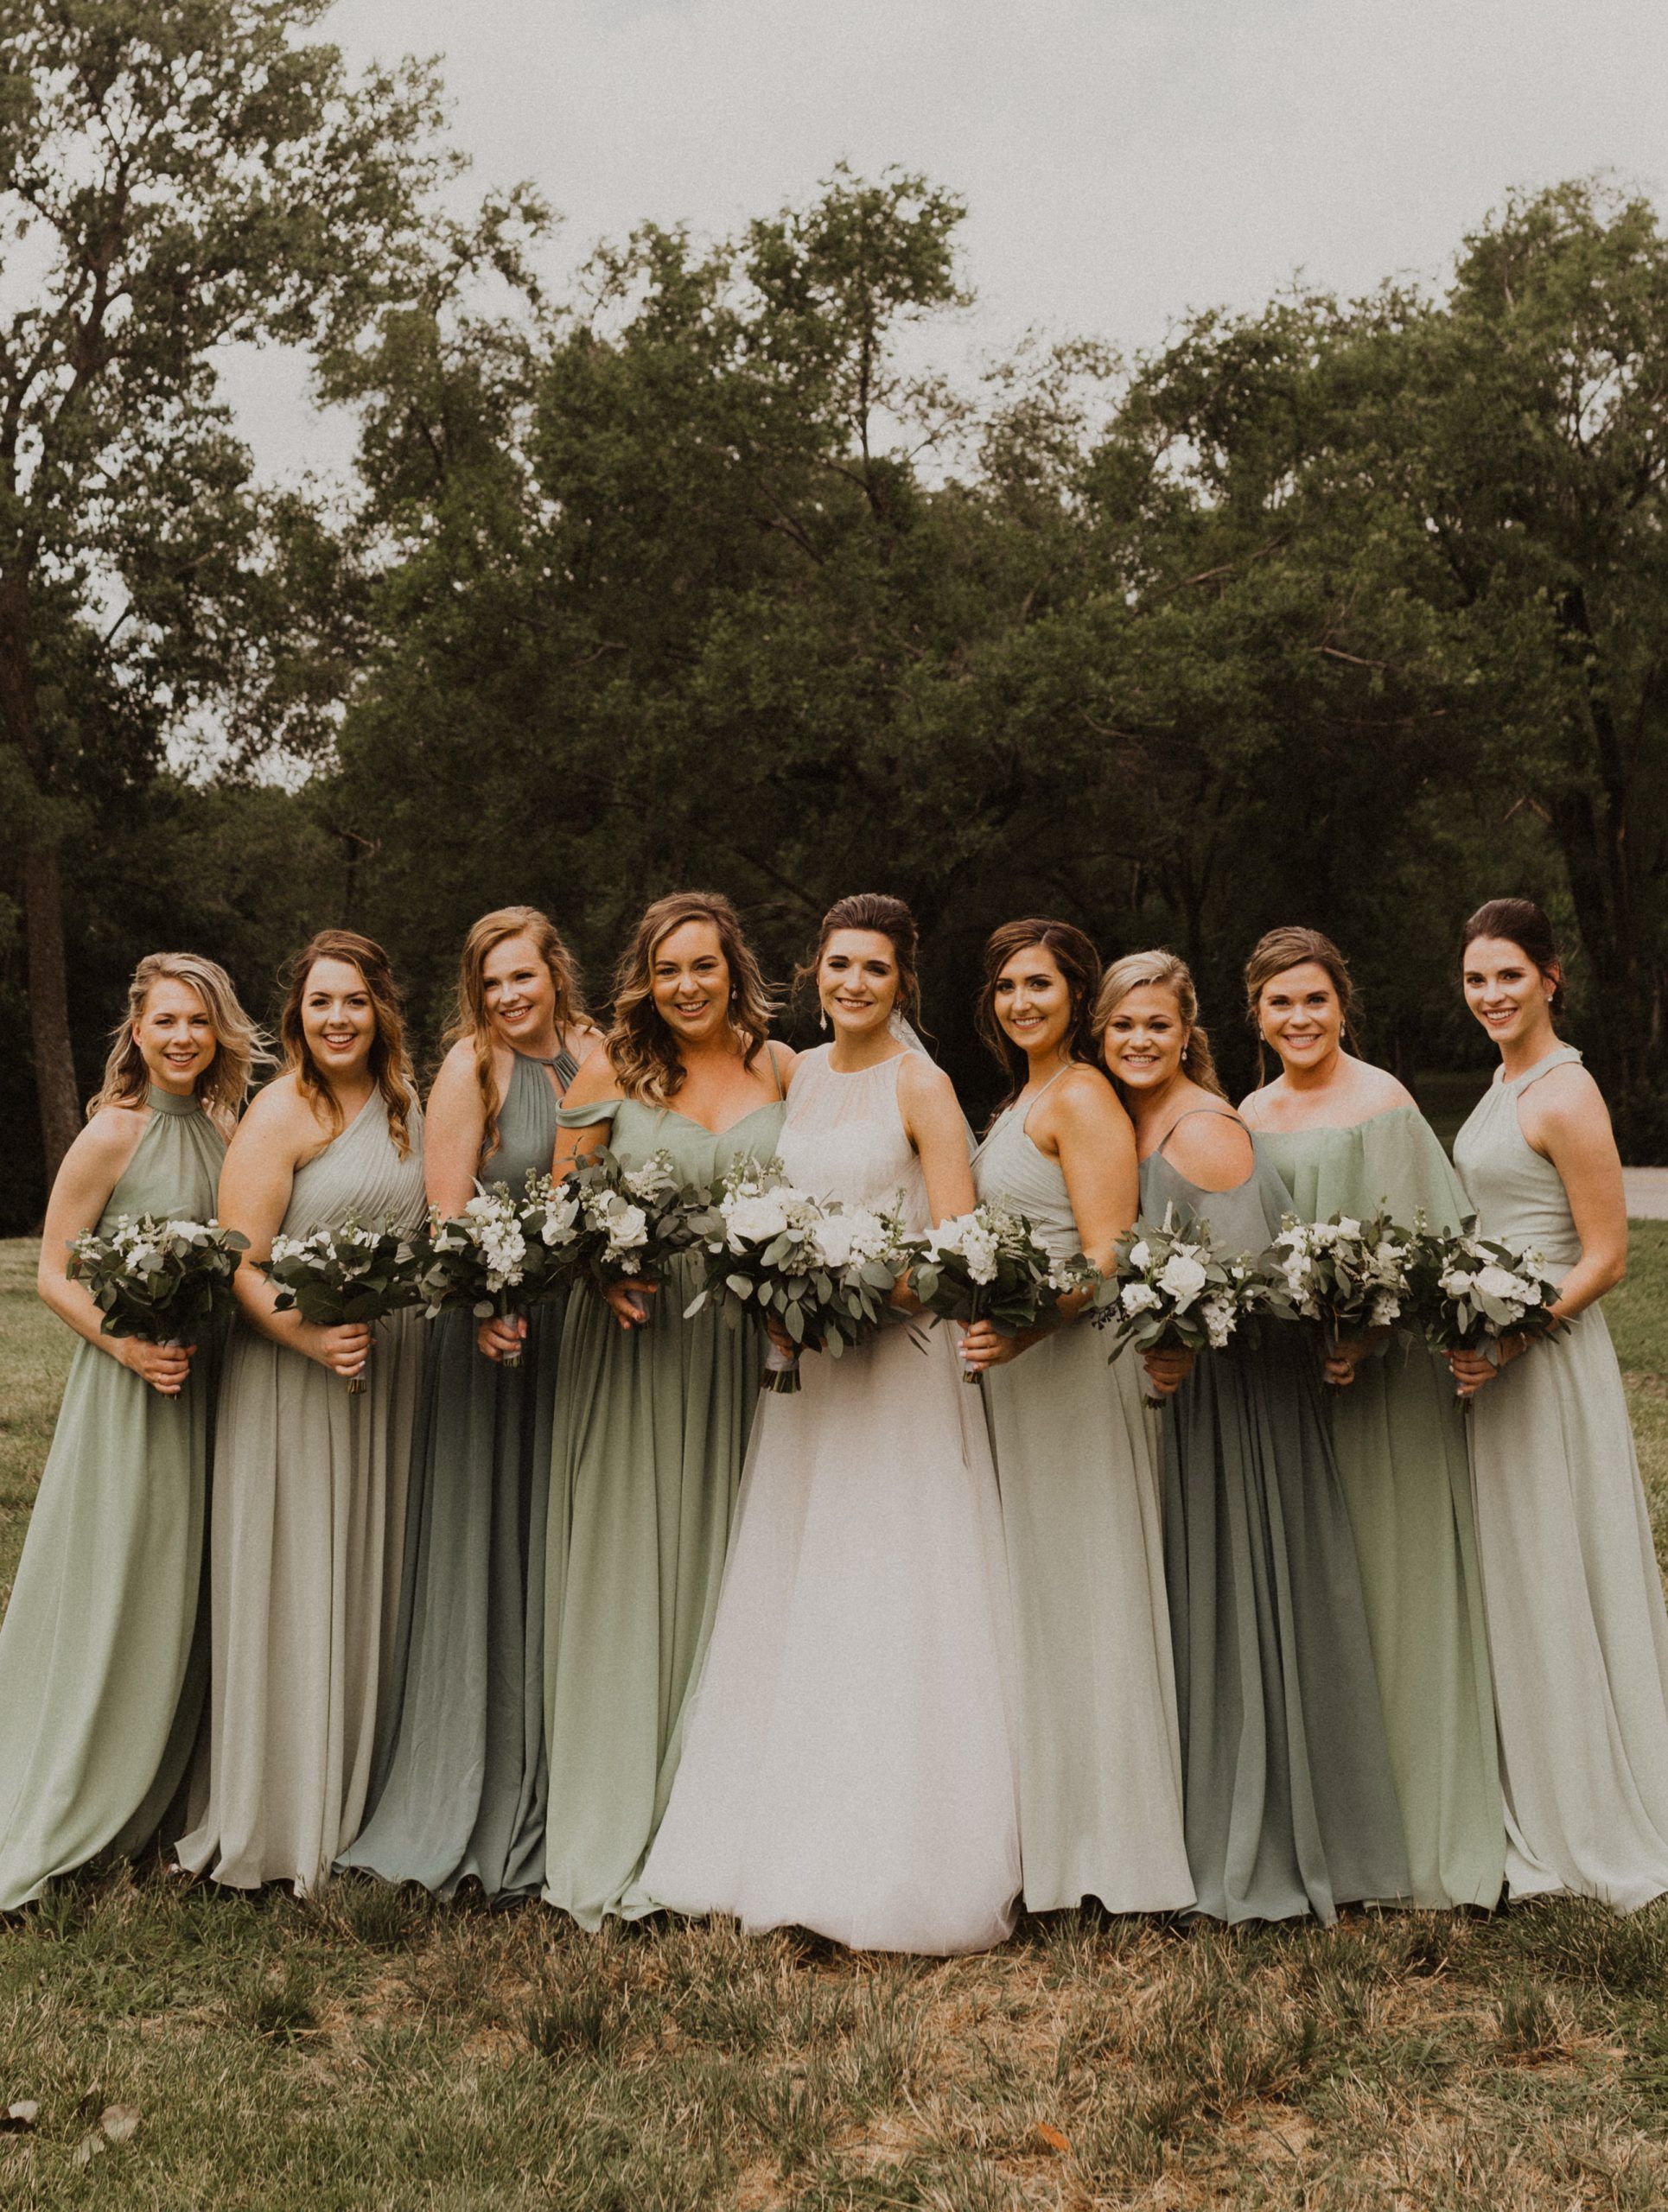 How to pulling off mismatched bridesmaid dresses perfectly | Tulle & Chantilly Wedding Blog -   18 sage green bridesmaid dresses fall ideas